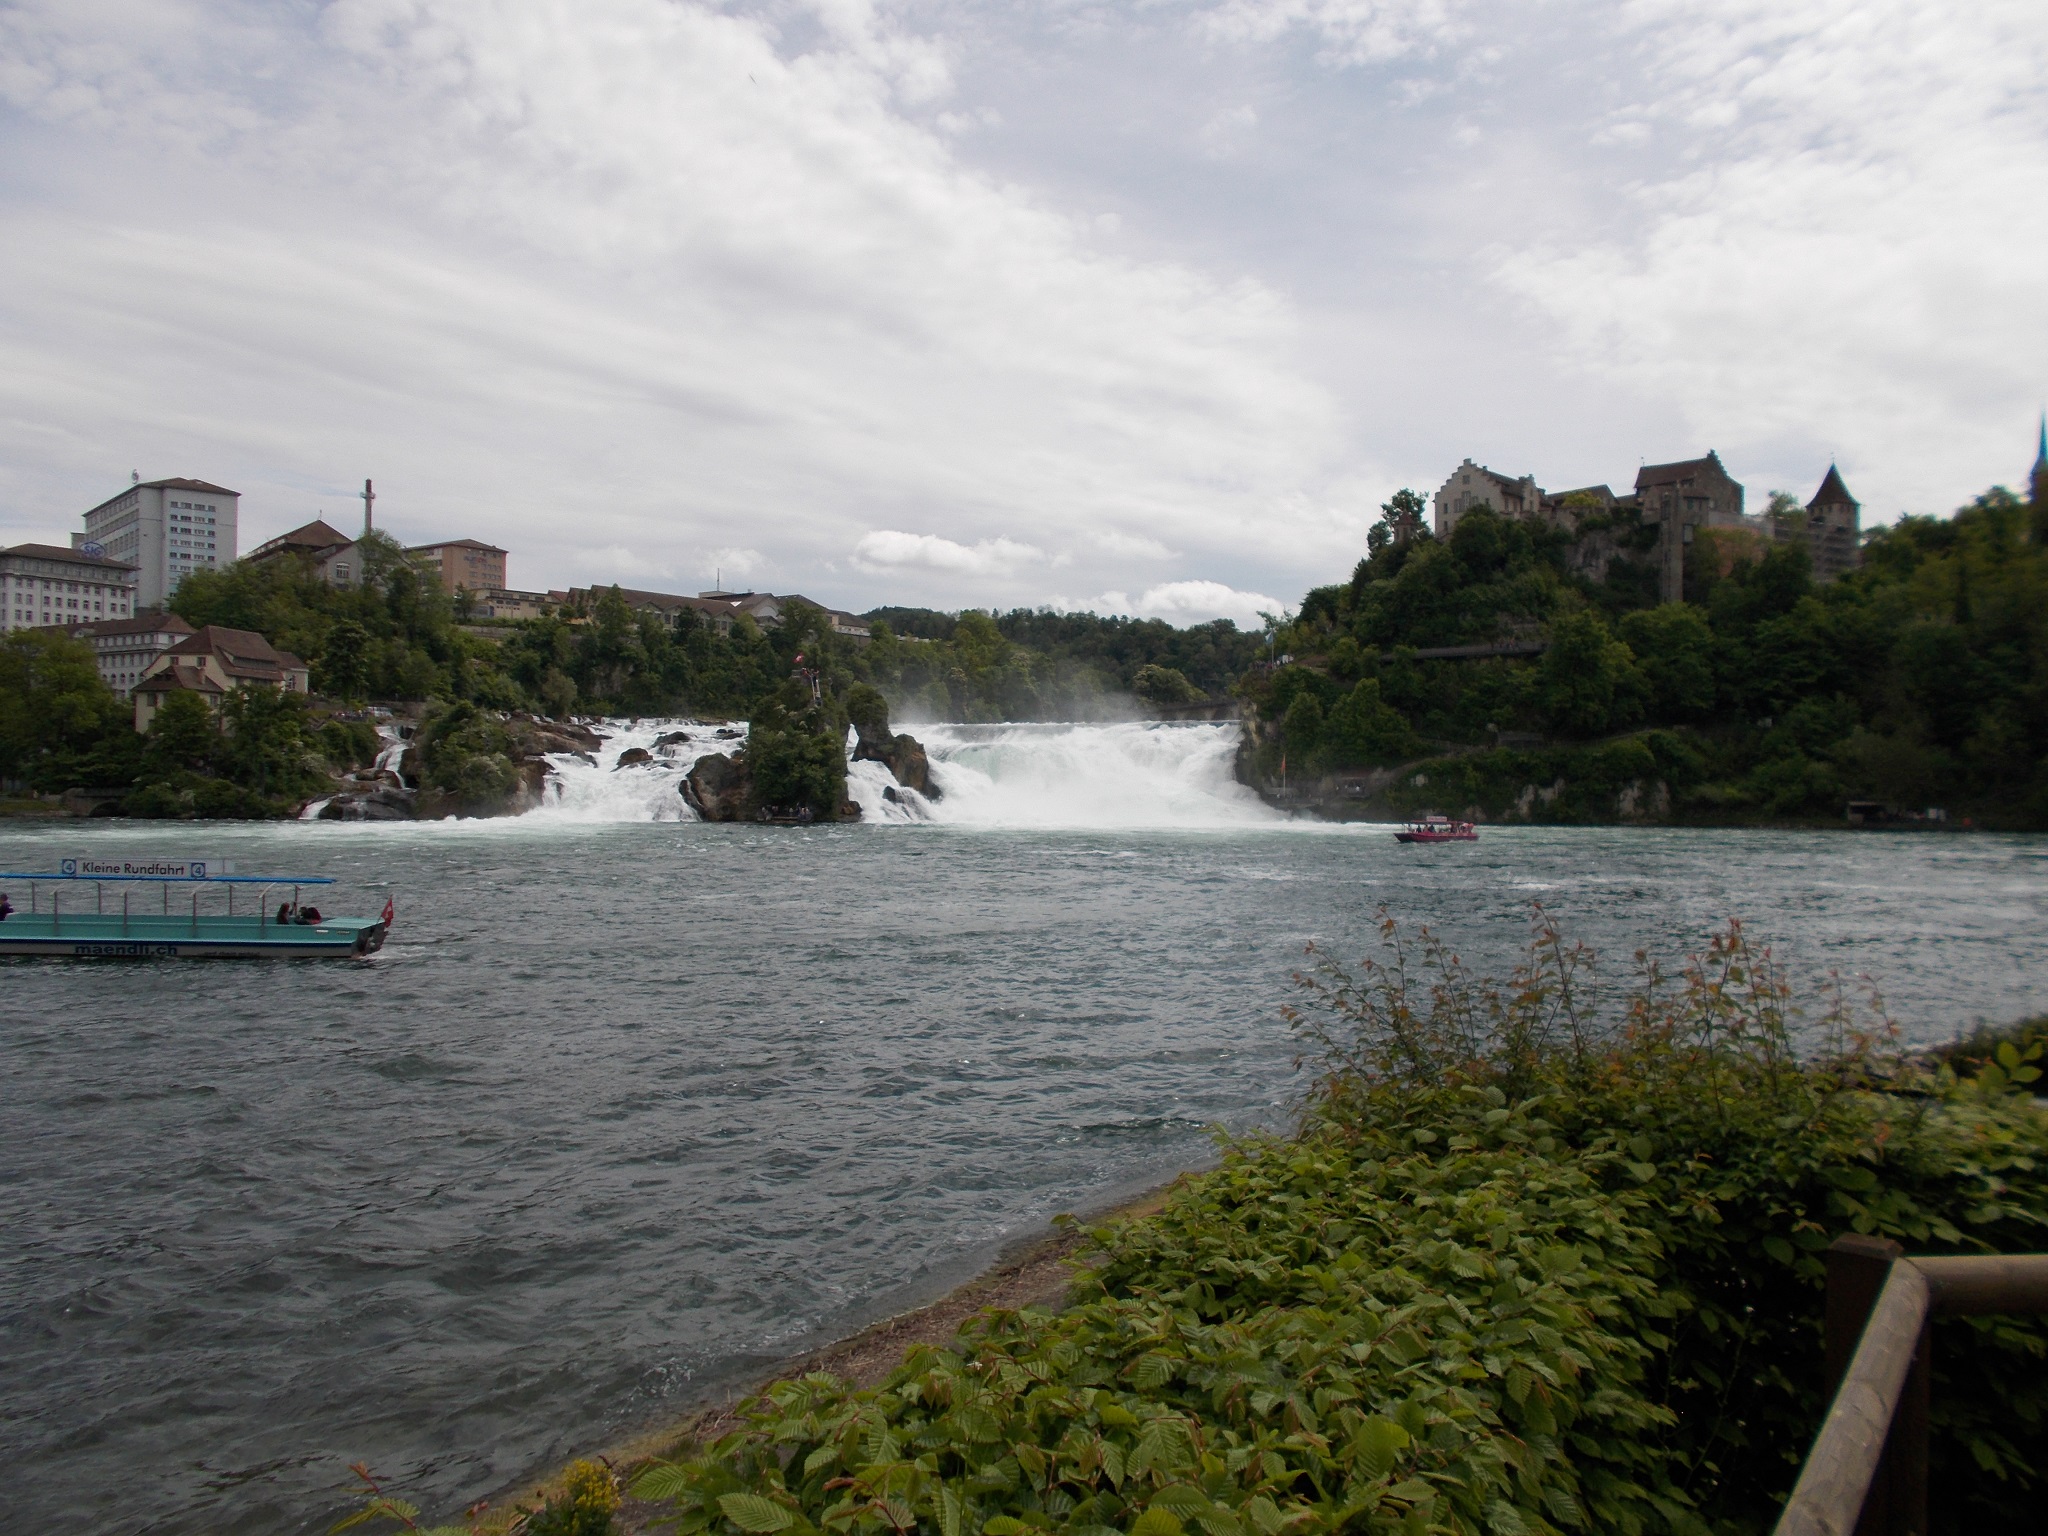 A wide angle shot of a large waterfall on the Rhine river. A castle is also visible on a hilltop.